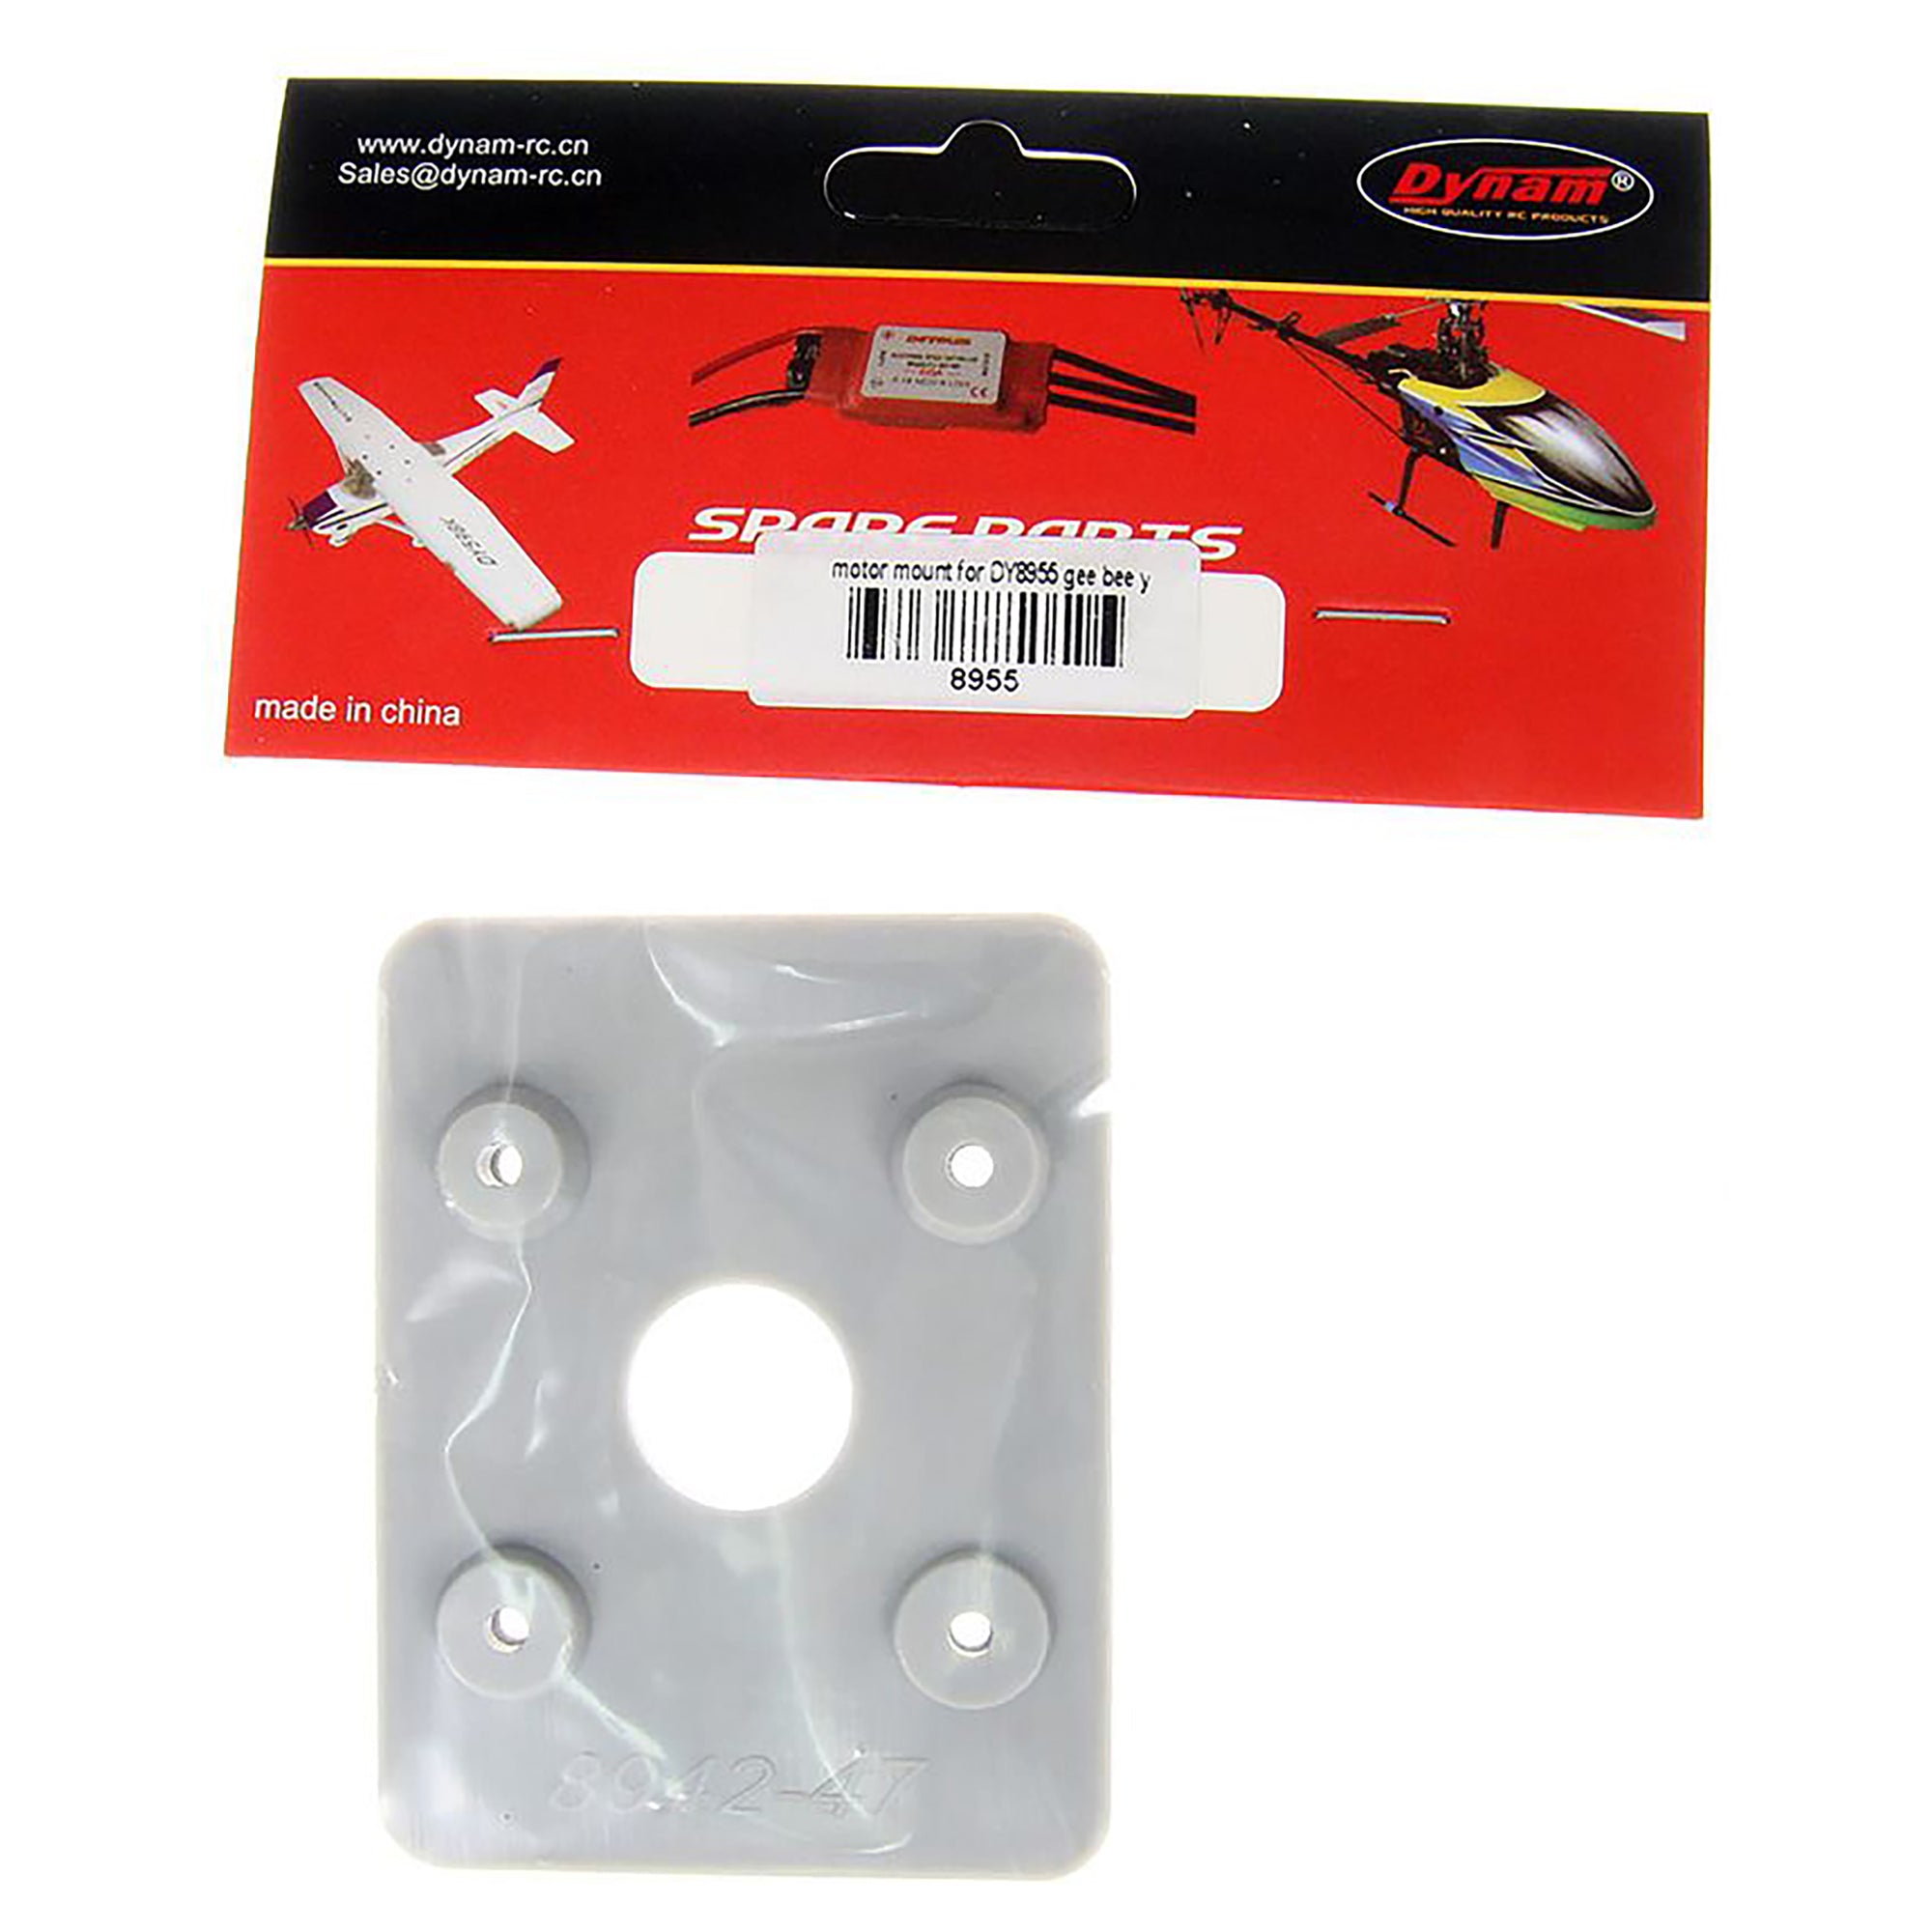 Dynam Motor Mount for DY8955 Gee Bee Y